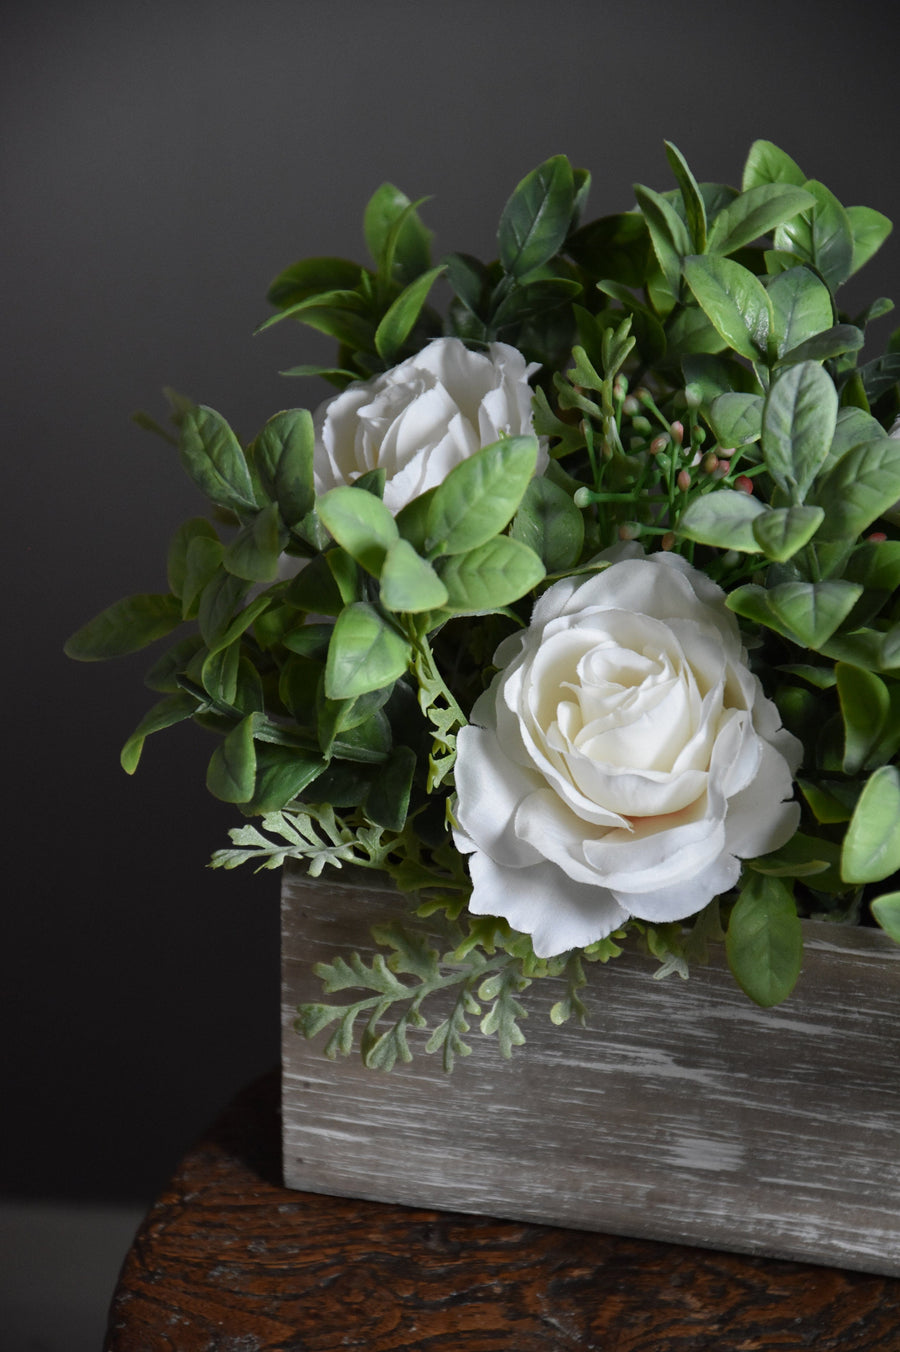 White Roses & Green Leaves in Wooden Box